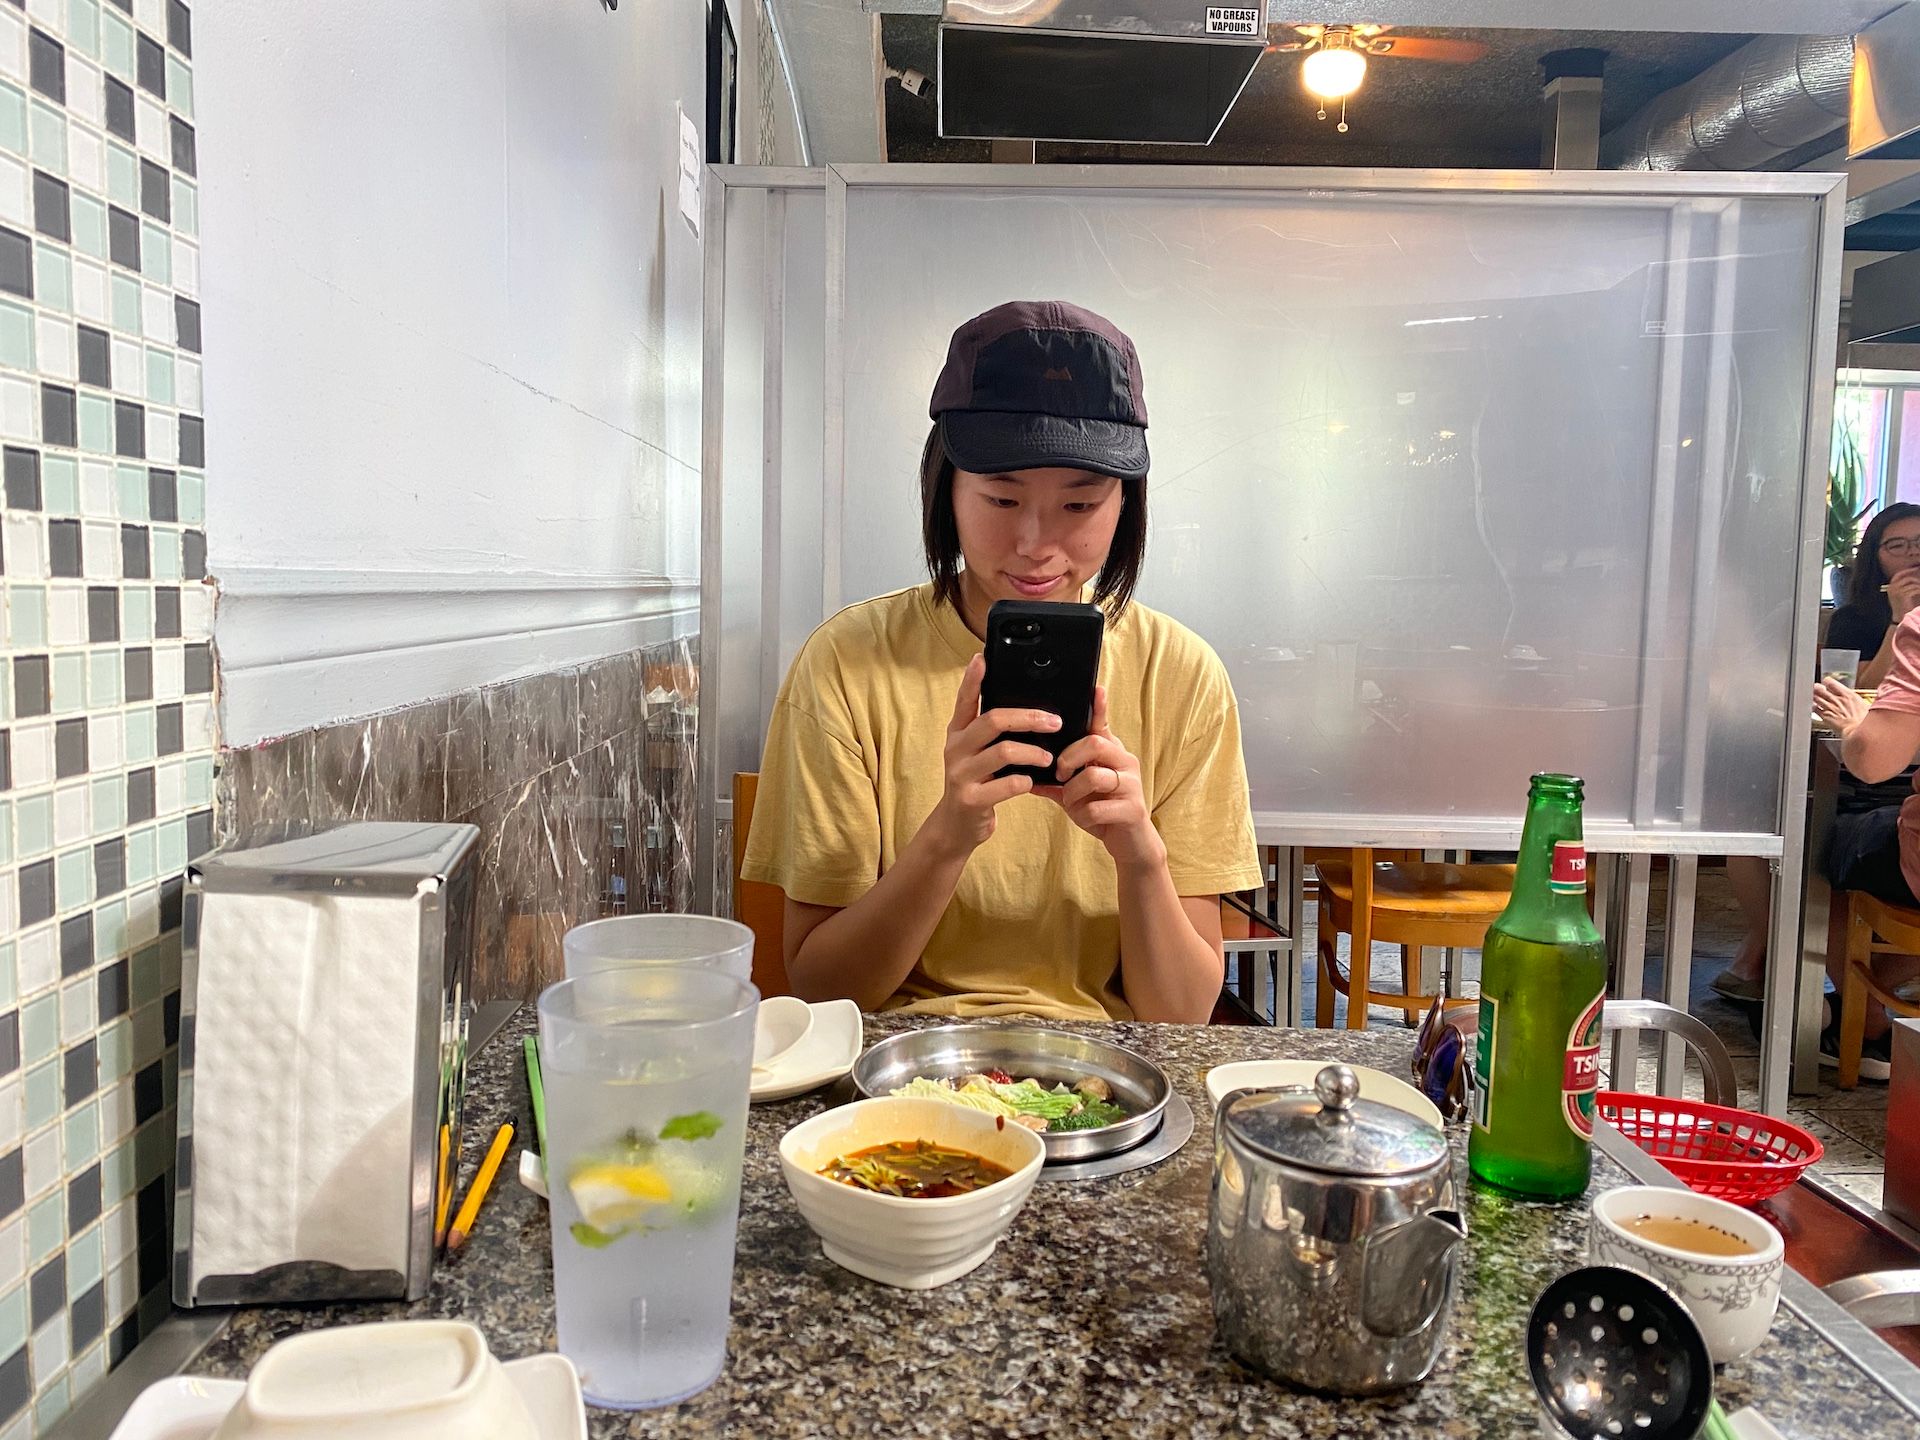 You can usually gauge if a Chinese restaurant is good and authentic based on whether Kuan takes pictures of her food to send it to her family.